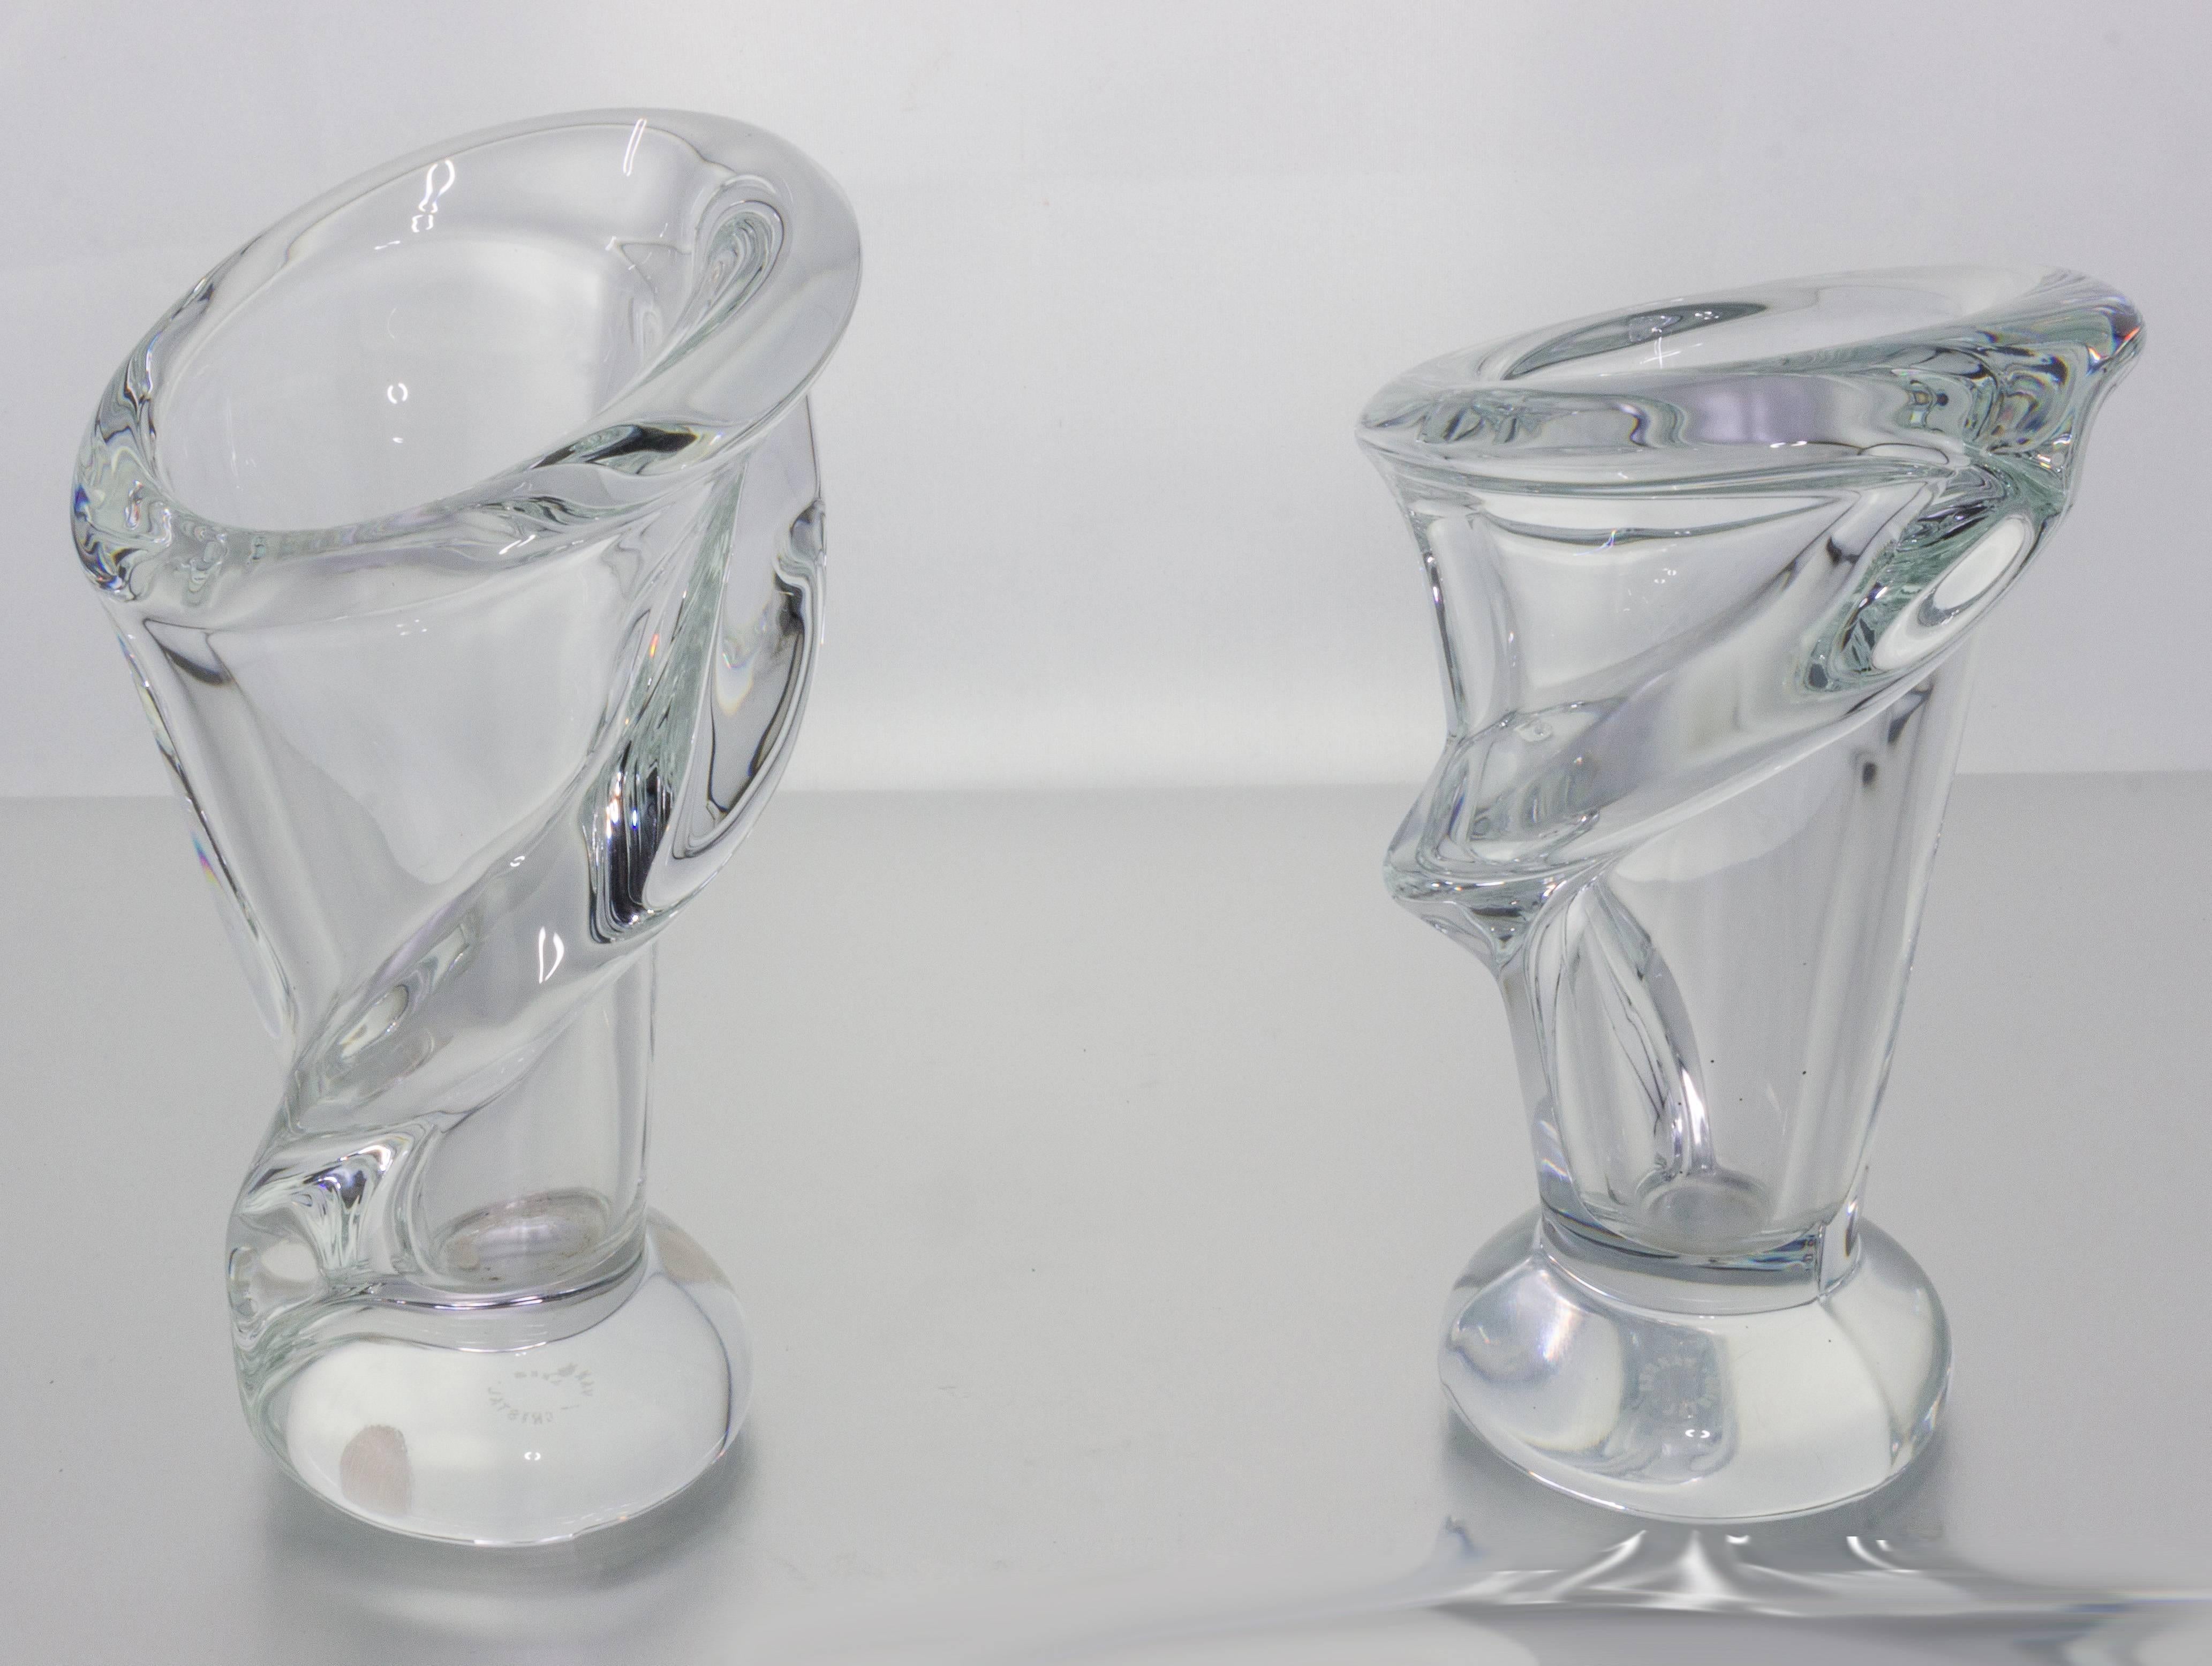 Pair of French crystal vases with a single swirl design signed by Vannes.